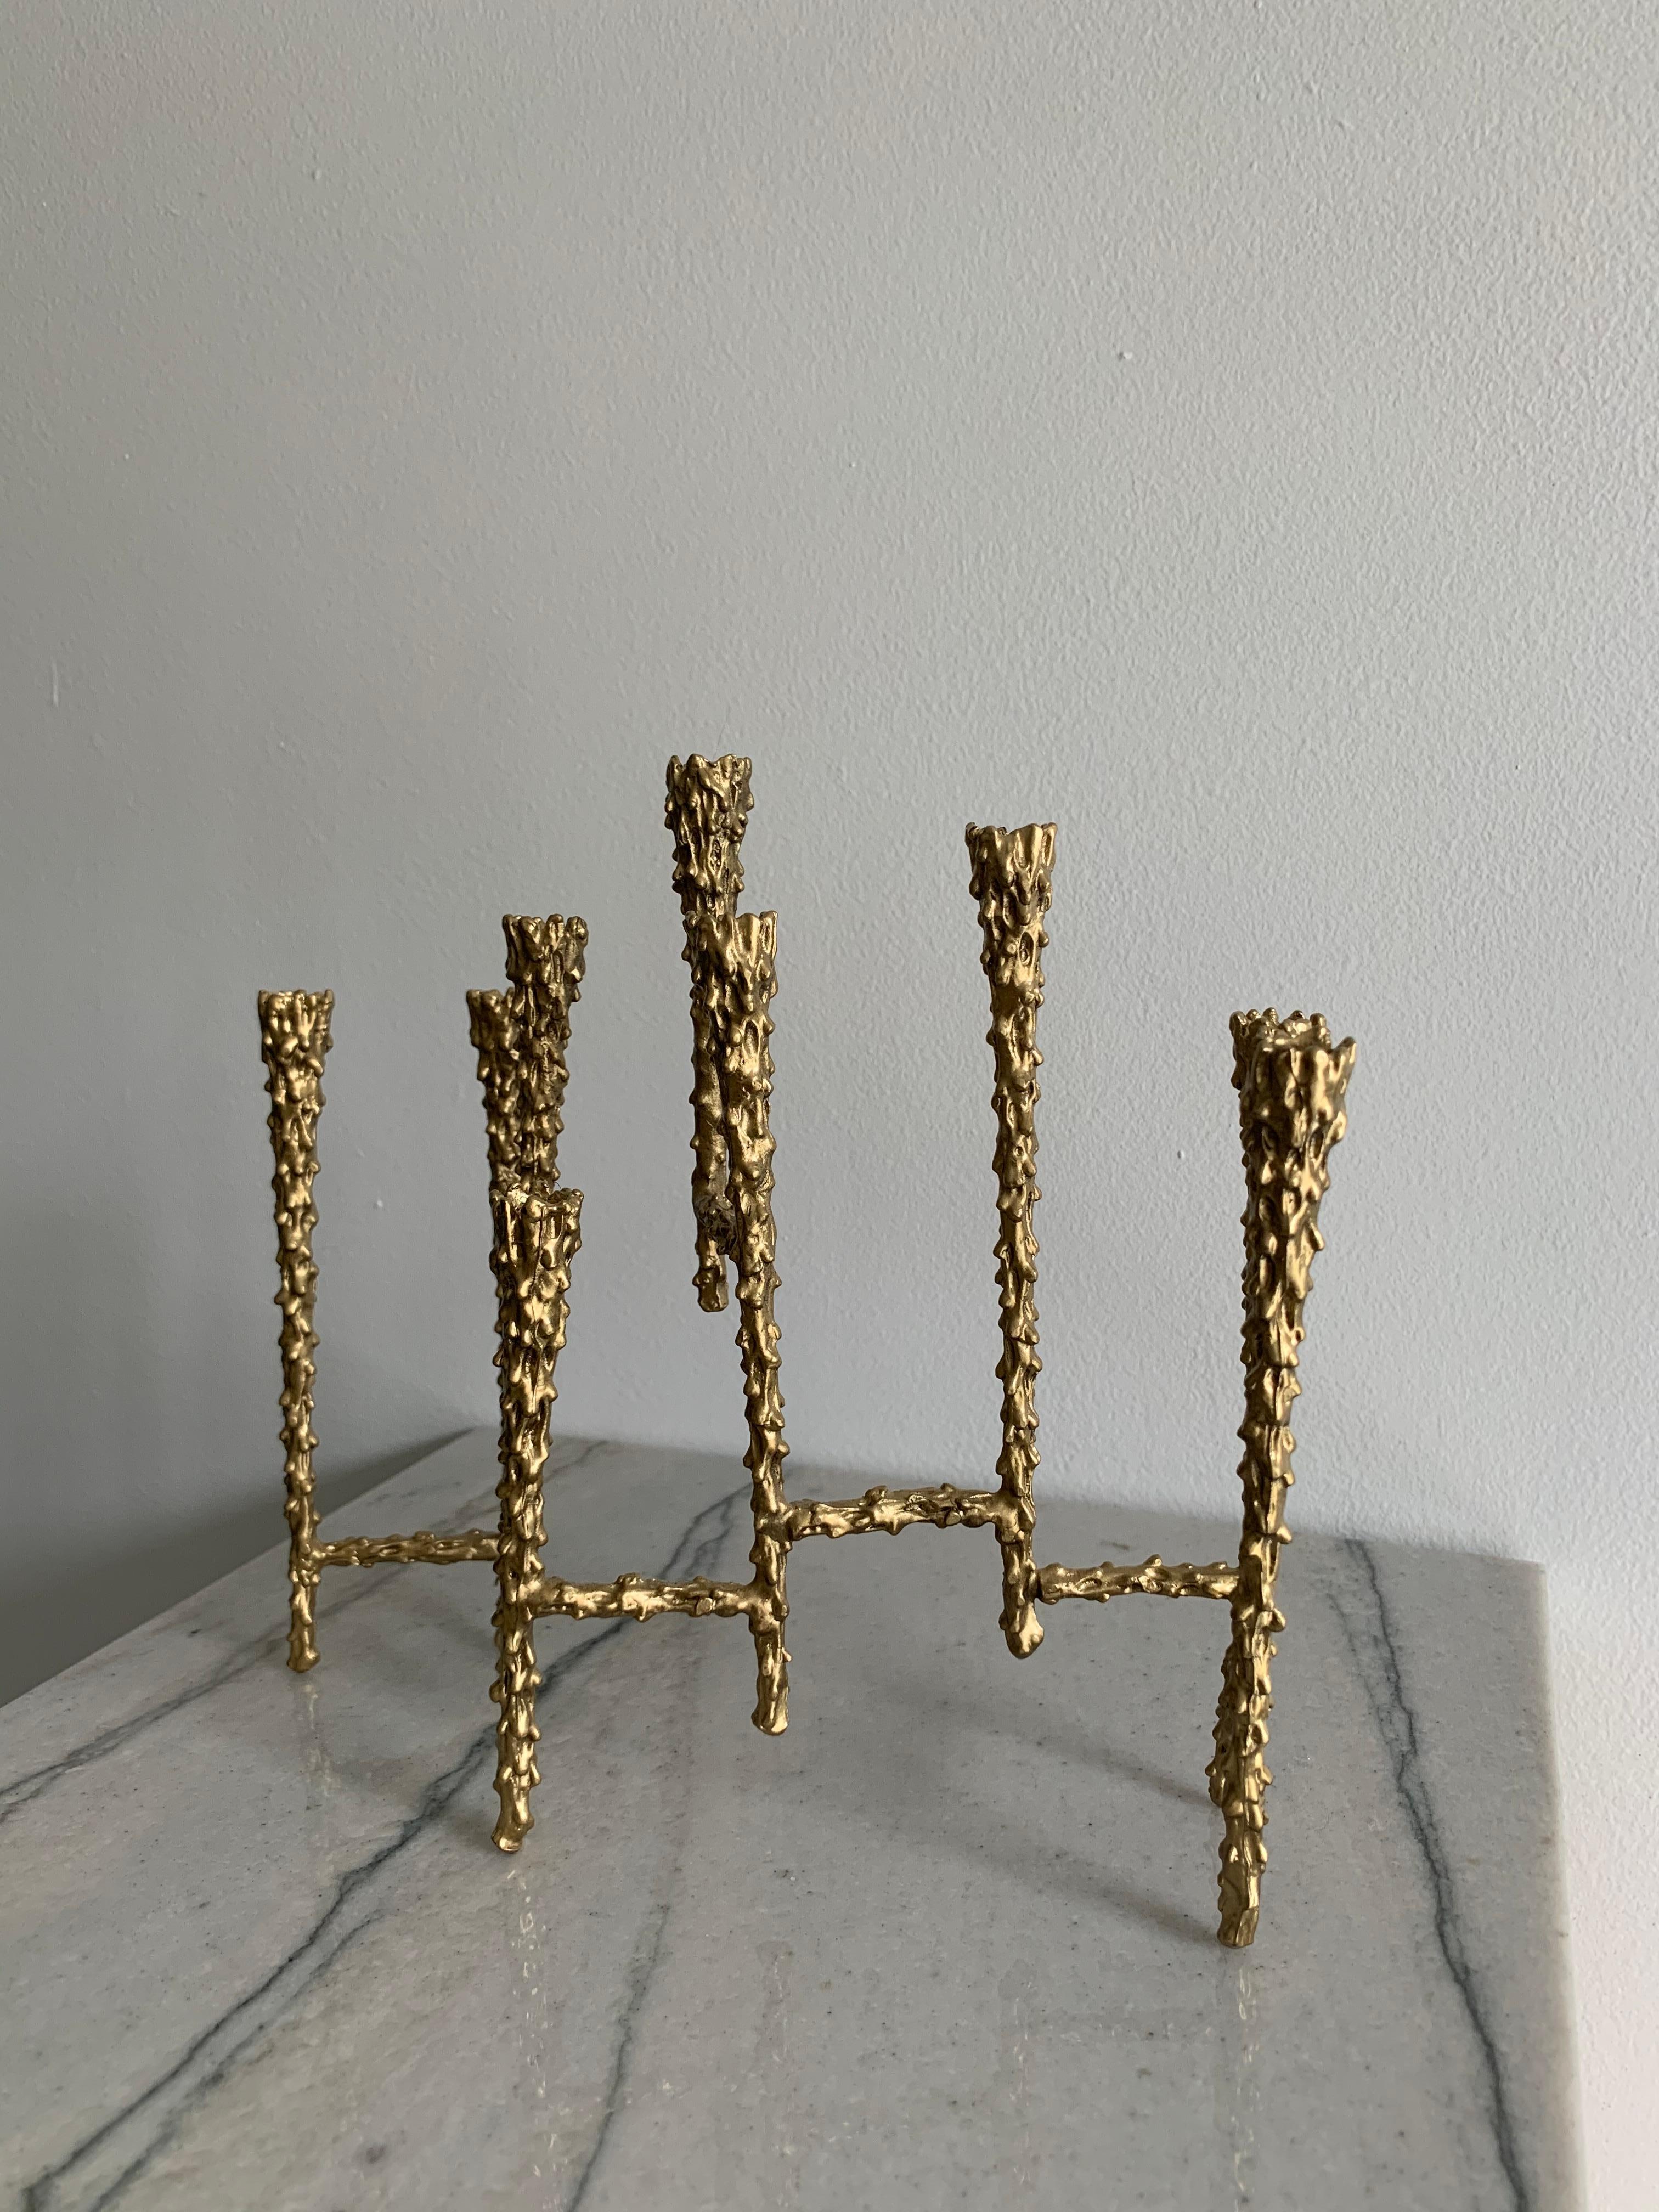 1960's Mid Century Brutalist Menorah/Candelabra made out of solid brass. Handcrafted with a melted brass look with a tiered design.

Dimensions:
9